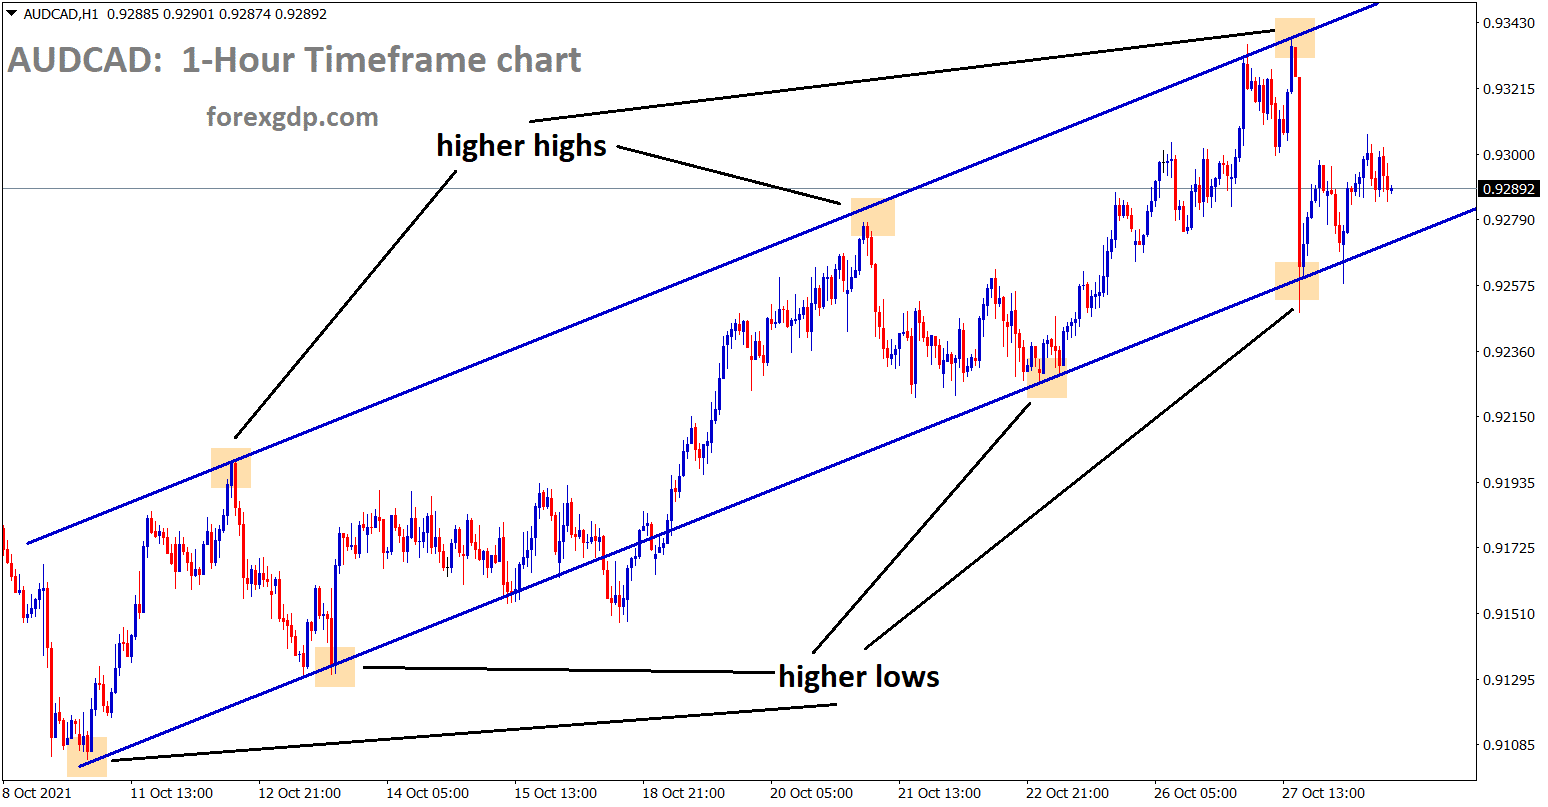 AUDCAD is moving in an Ascending channel for a long time. Now the price is rebounding from the higher low area of the ascending channel line.